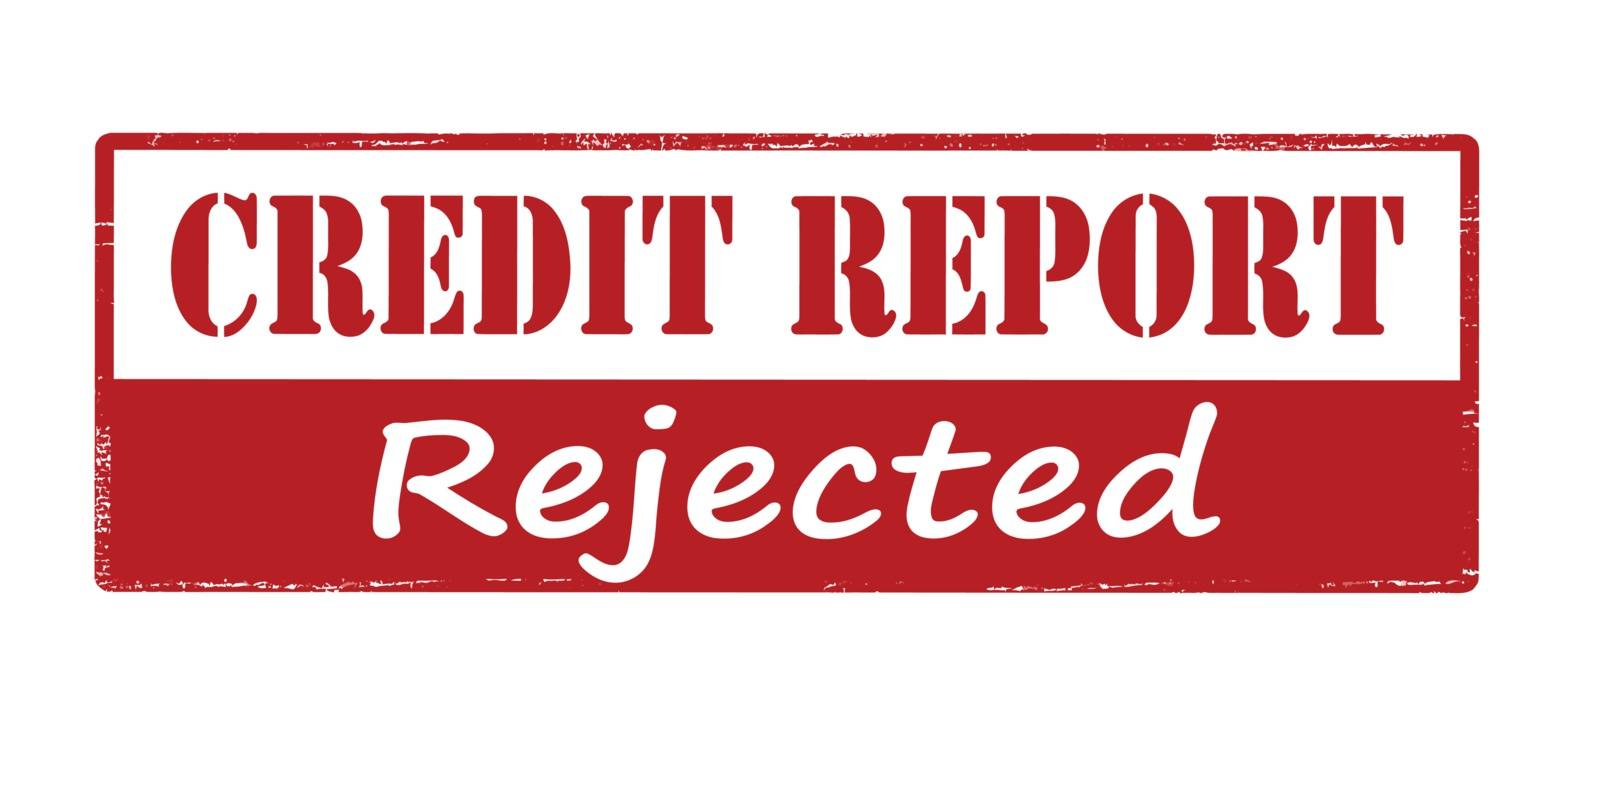 Rubber stamp with text credit report rejected inside, vector illustration